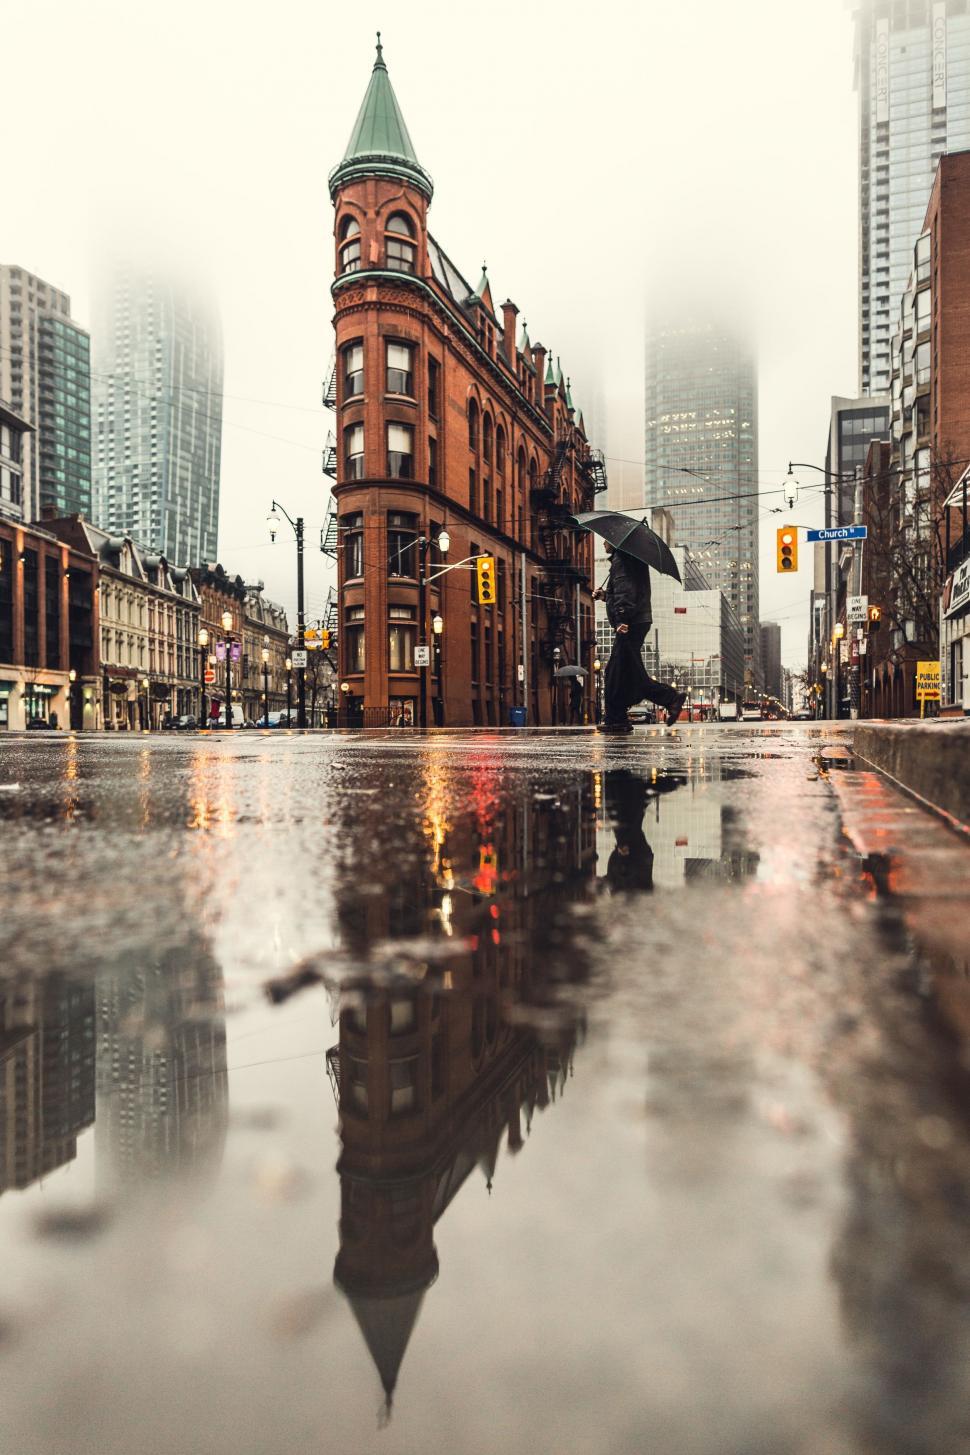 Free Image of Person Holding Umbrella on Wet City Street 